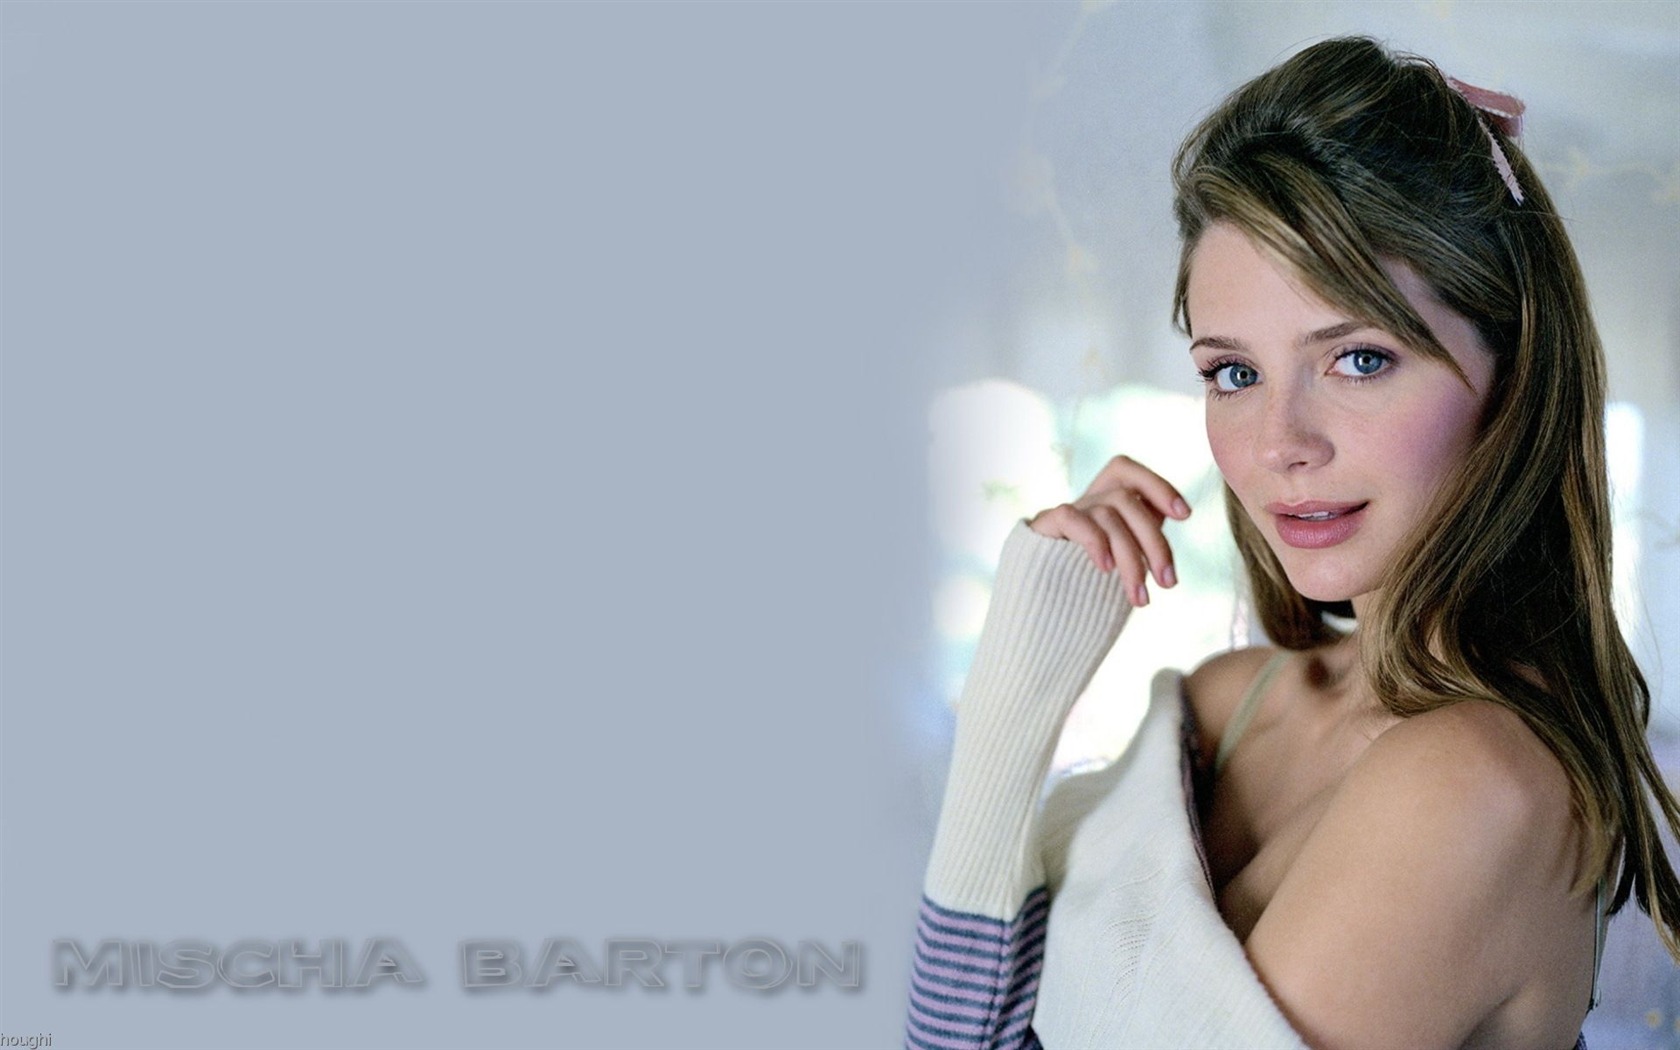 Mischa Barton #098 - 1680x1050 Wallpapers Pictures Photos Images